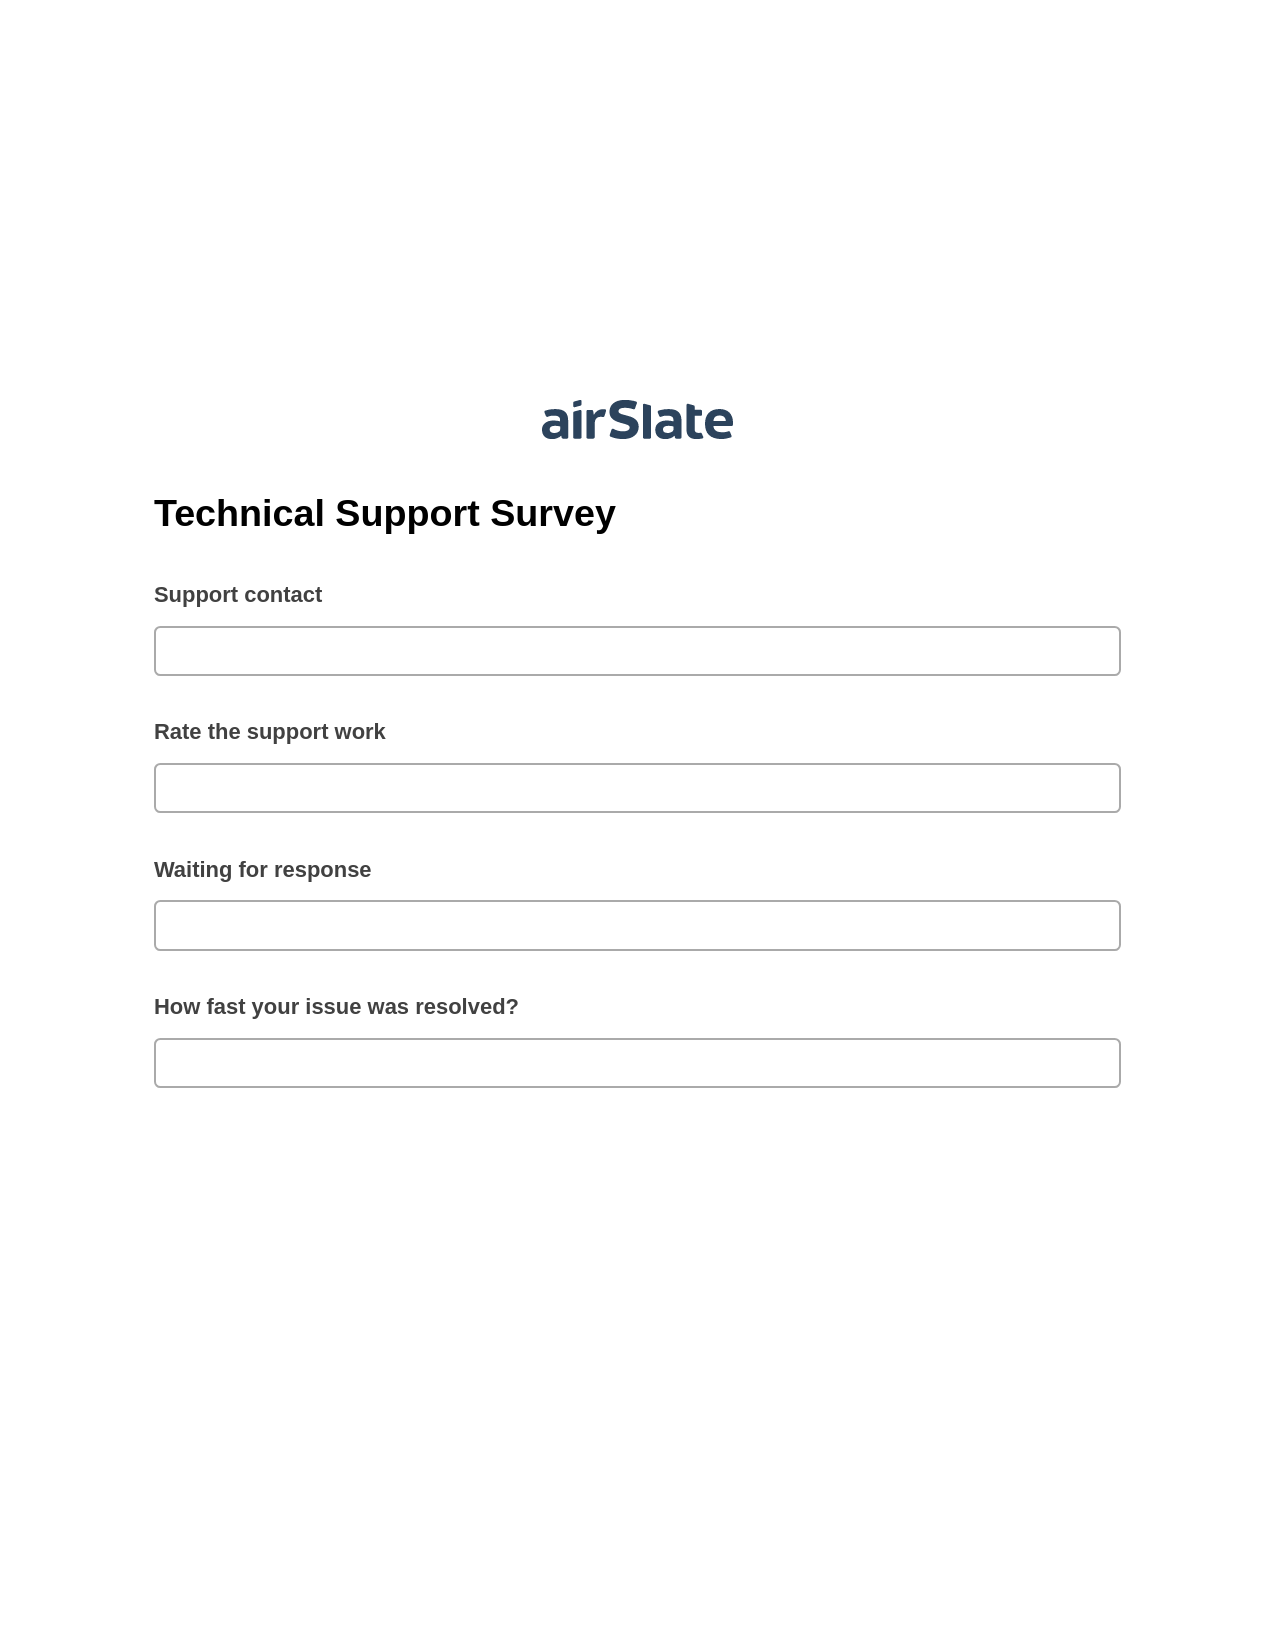 Technical Support Survey Pre-fill Dropdowns from Excel Bot, Open under a Role Bot, Export to WebMerge Bot